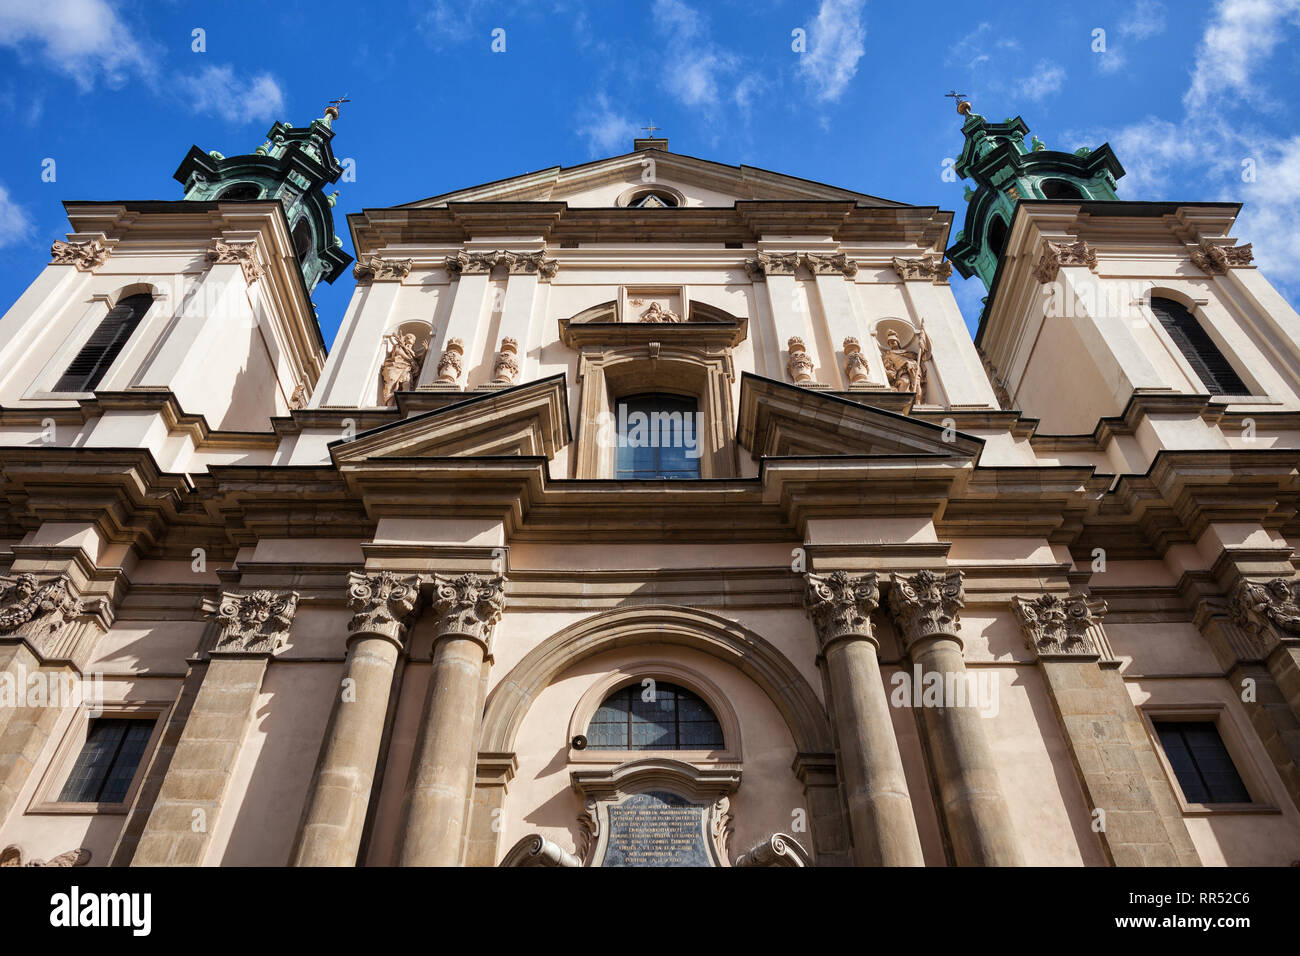 Poland, Krakow, Church of St. Anne in the Old Town, Polish Baroque architecture, city landmark. Stock Photo